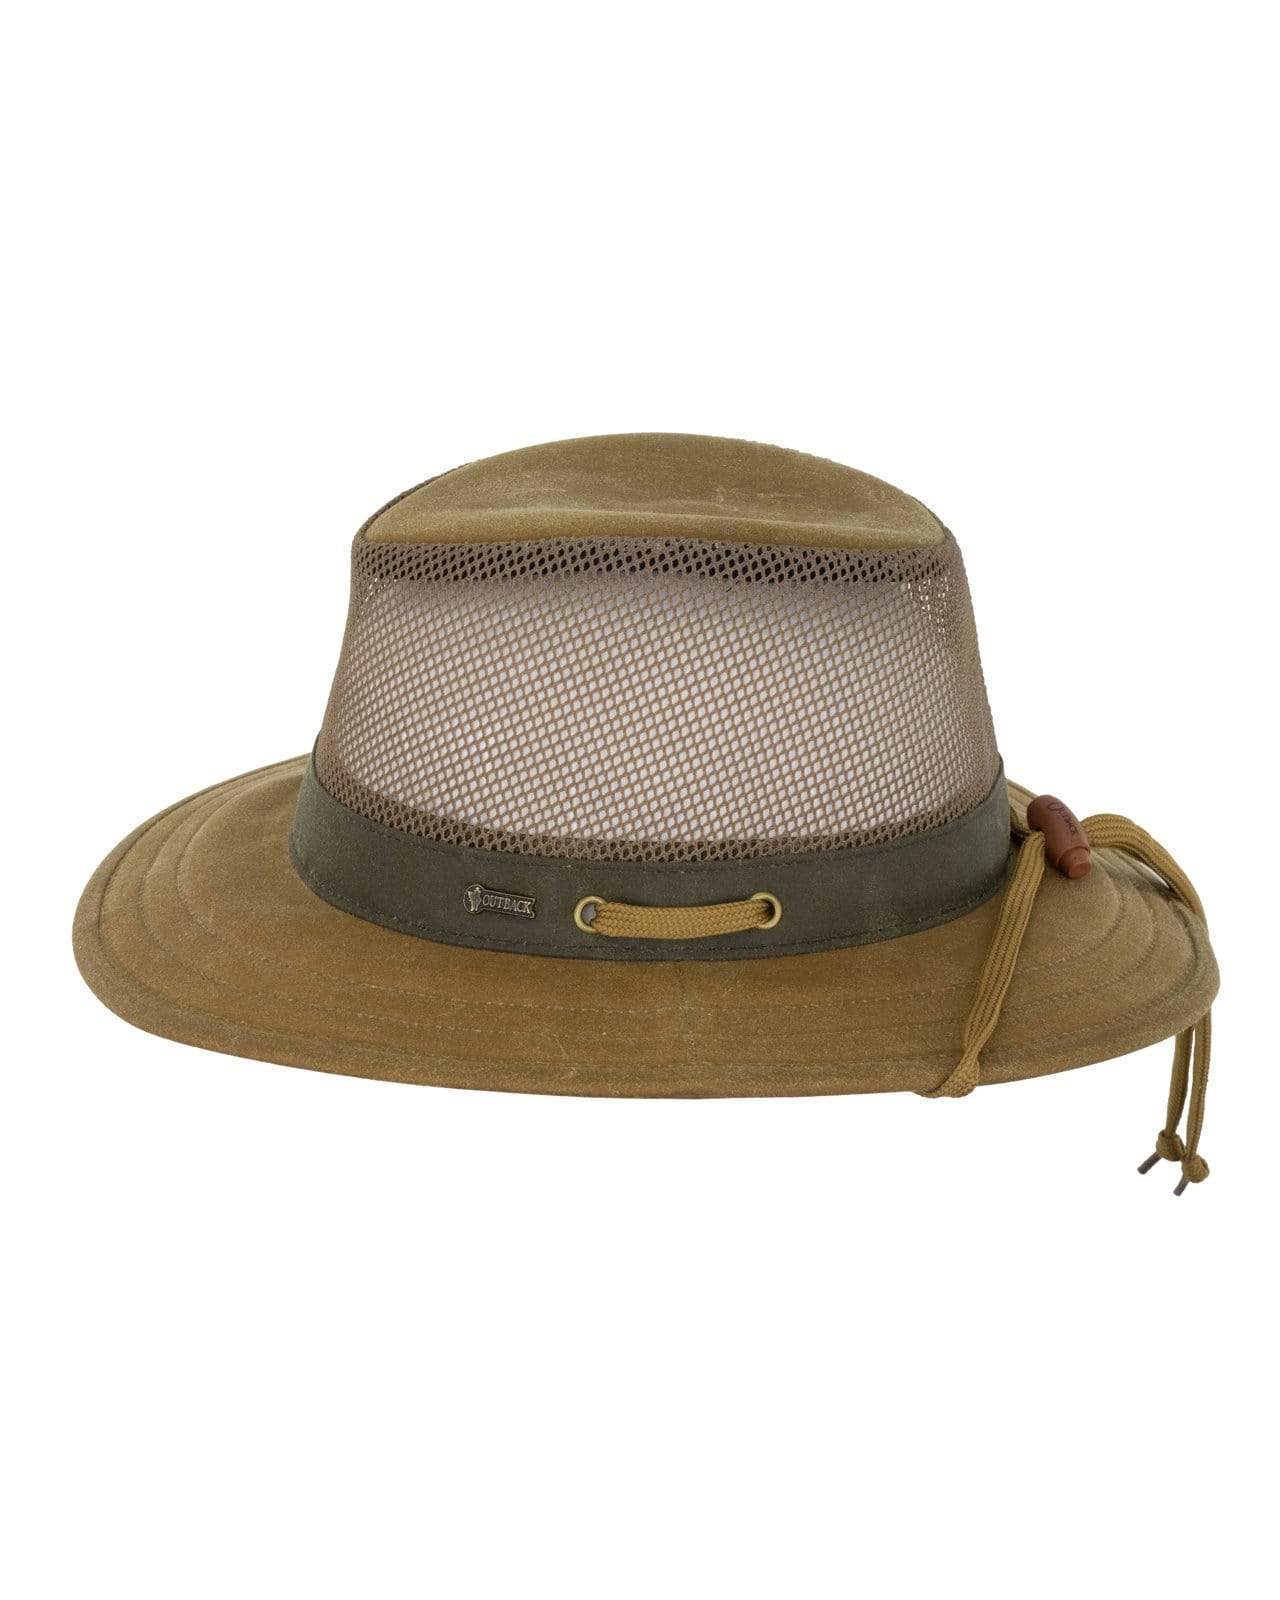 Outback Trading Company Willis with Mesh Hats